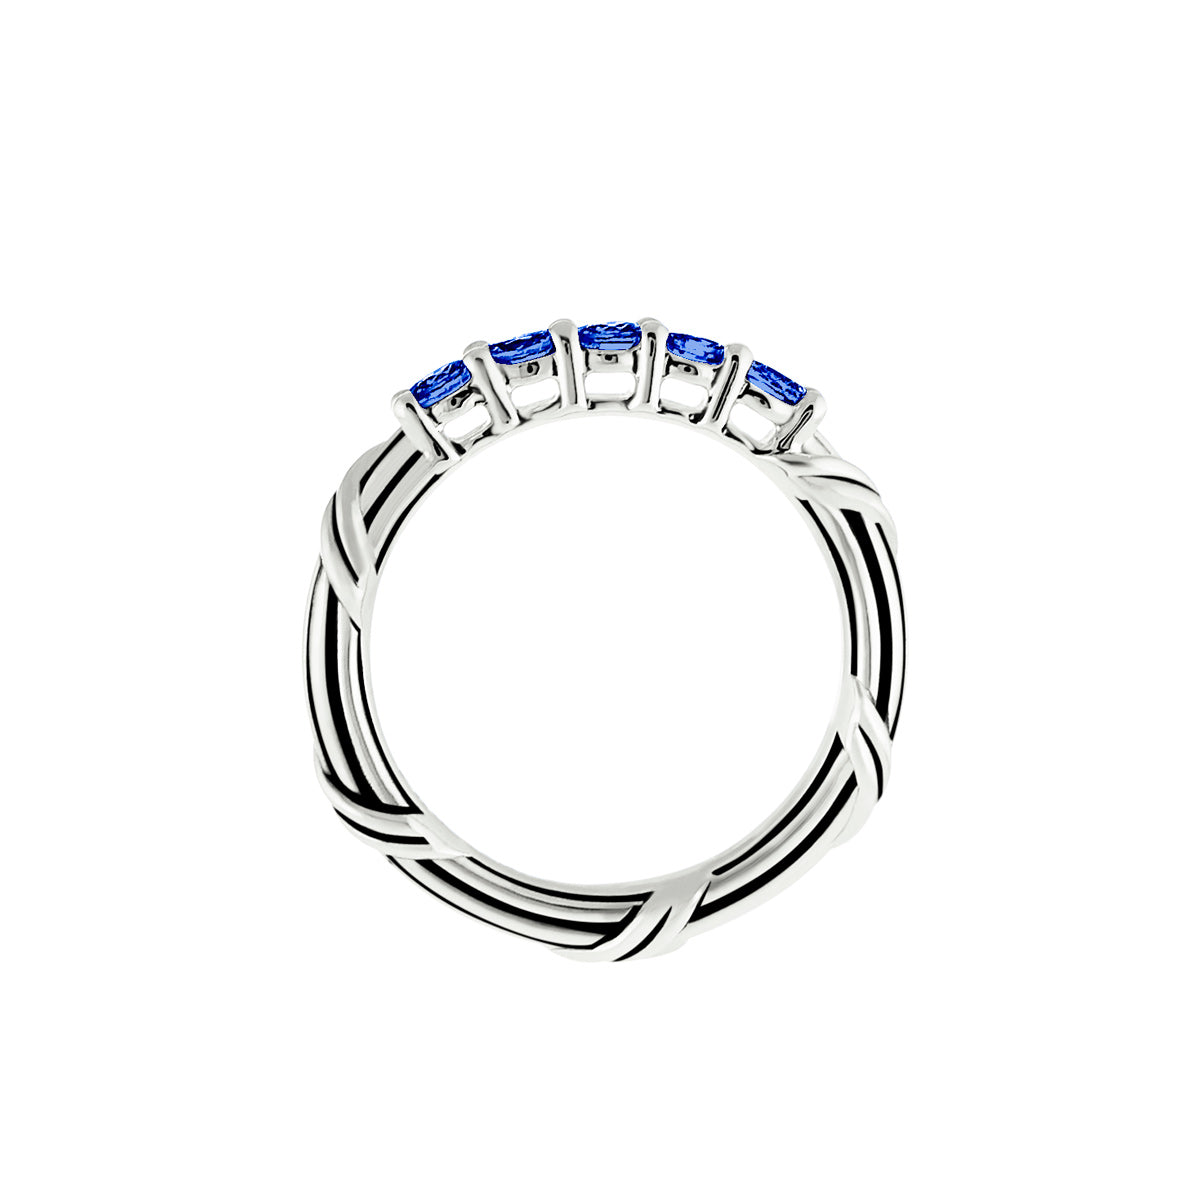 Signature Classic Five Stone Band Ring with blue sapphires in sterling silver